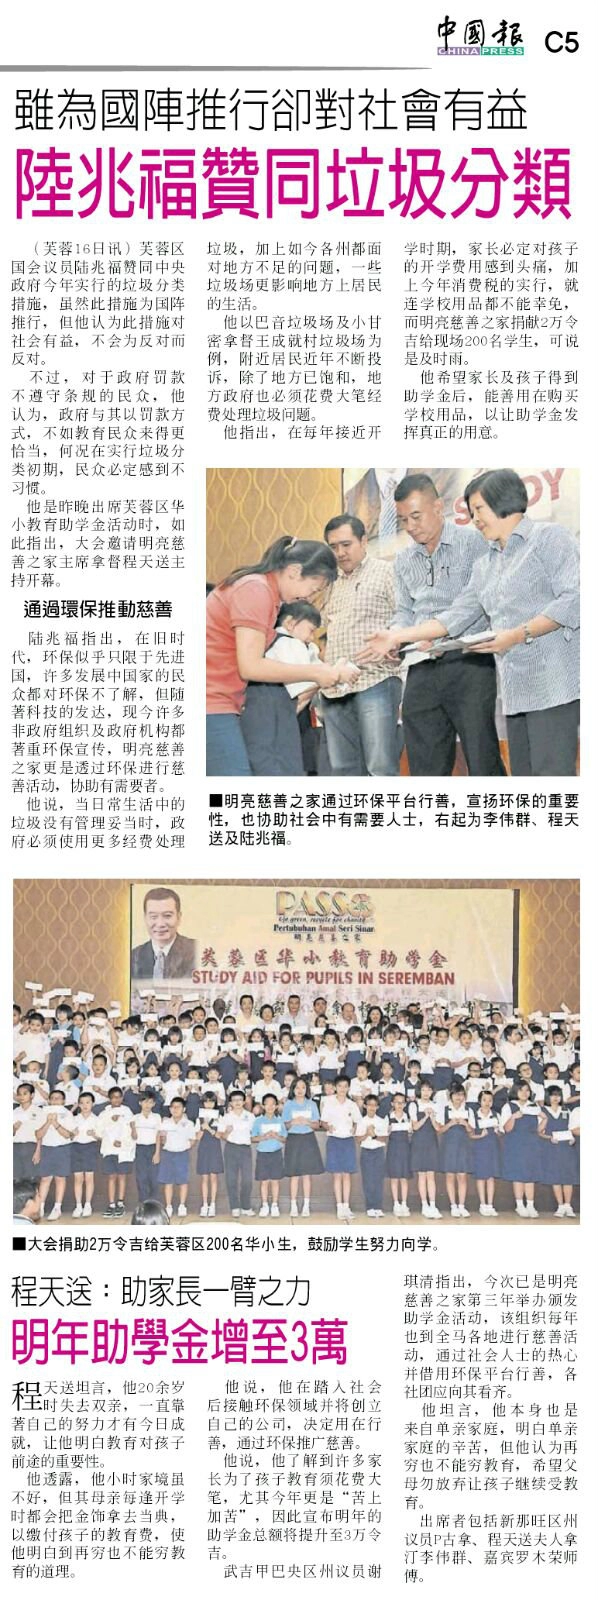 15.12.2015 Study Aid Donation of RM20,000 distributed to 100 pupils in Seremban